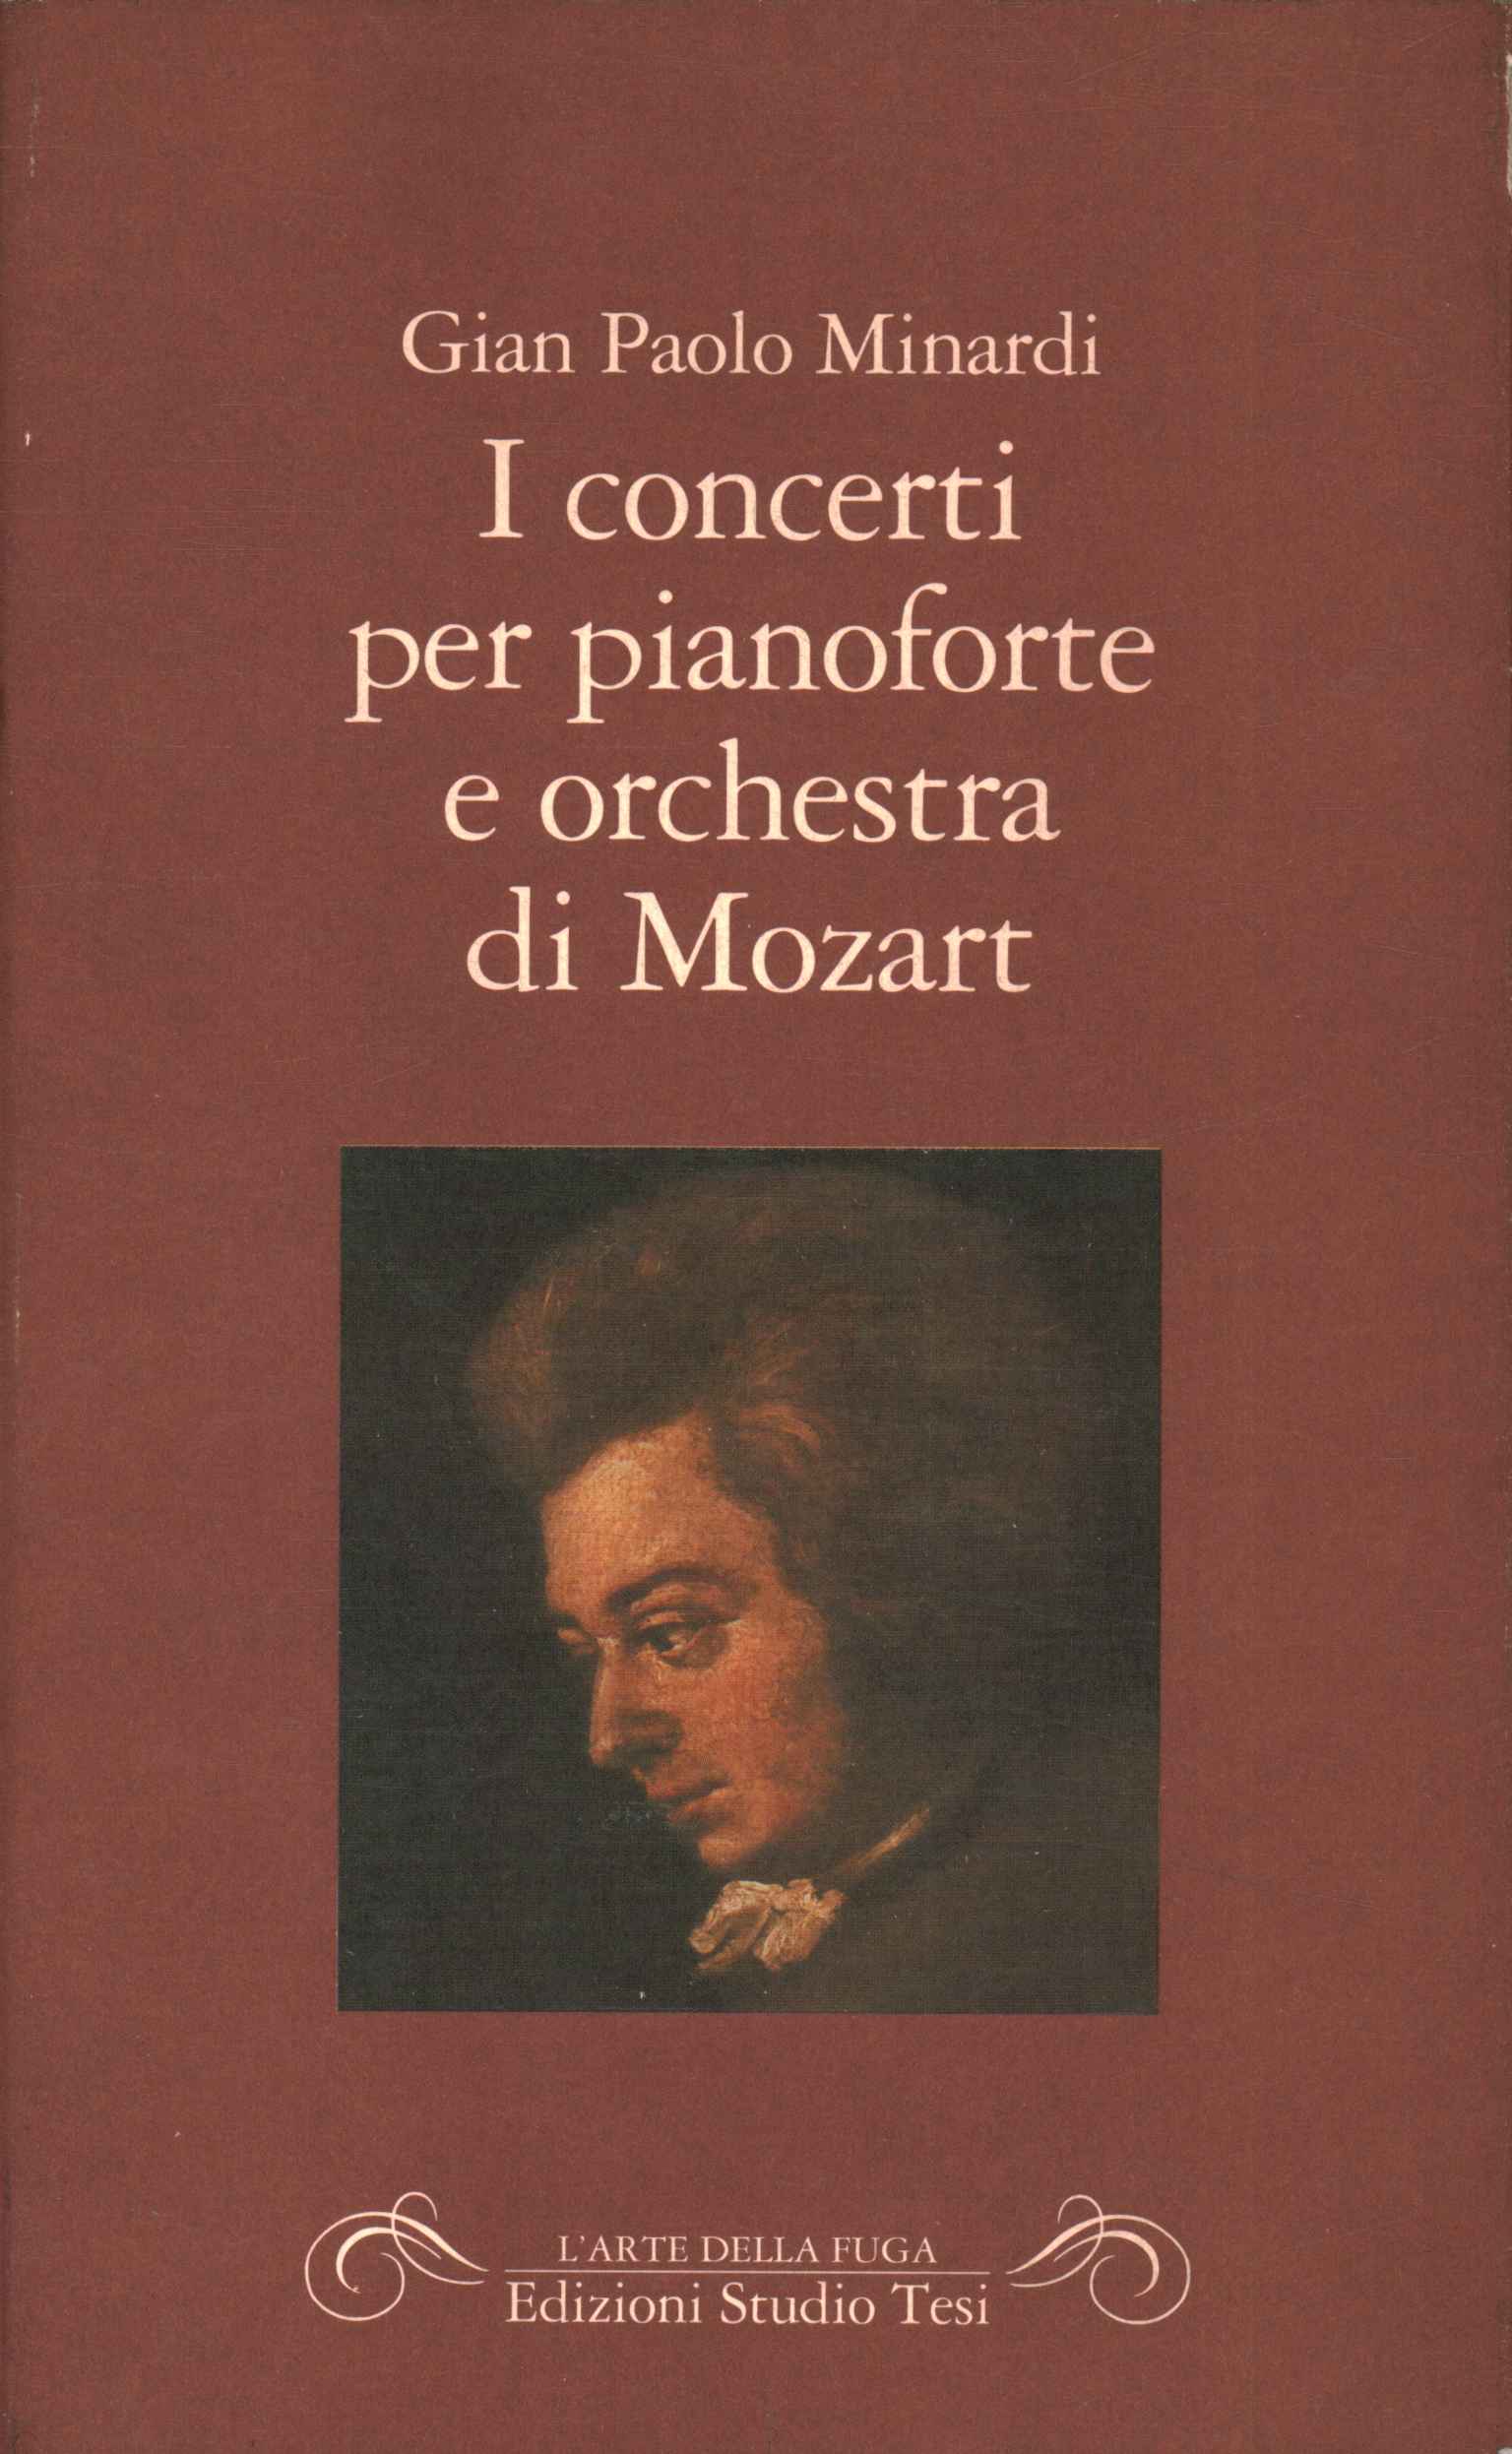 Concertos for piano and orchestra